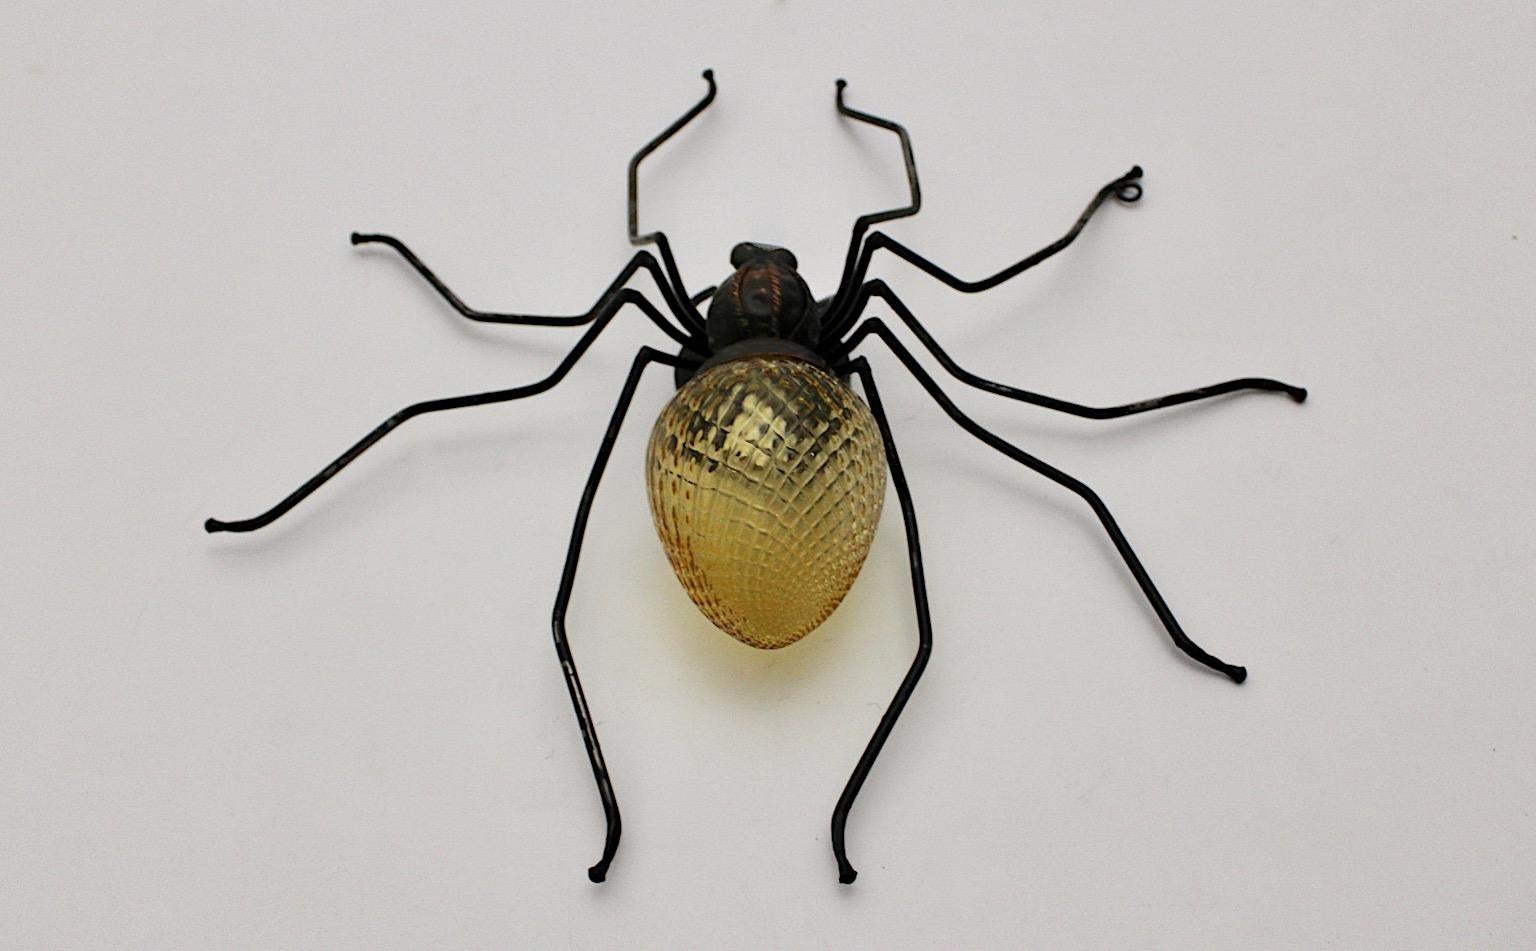 Mid-Century Modern vintage handmade spider fly wall light or sconce or table lamp from yellow grooved glass and metal.
The legs were made of partly black lacquered metal wire, while the body from copper and yellow structured glass.
This wall light